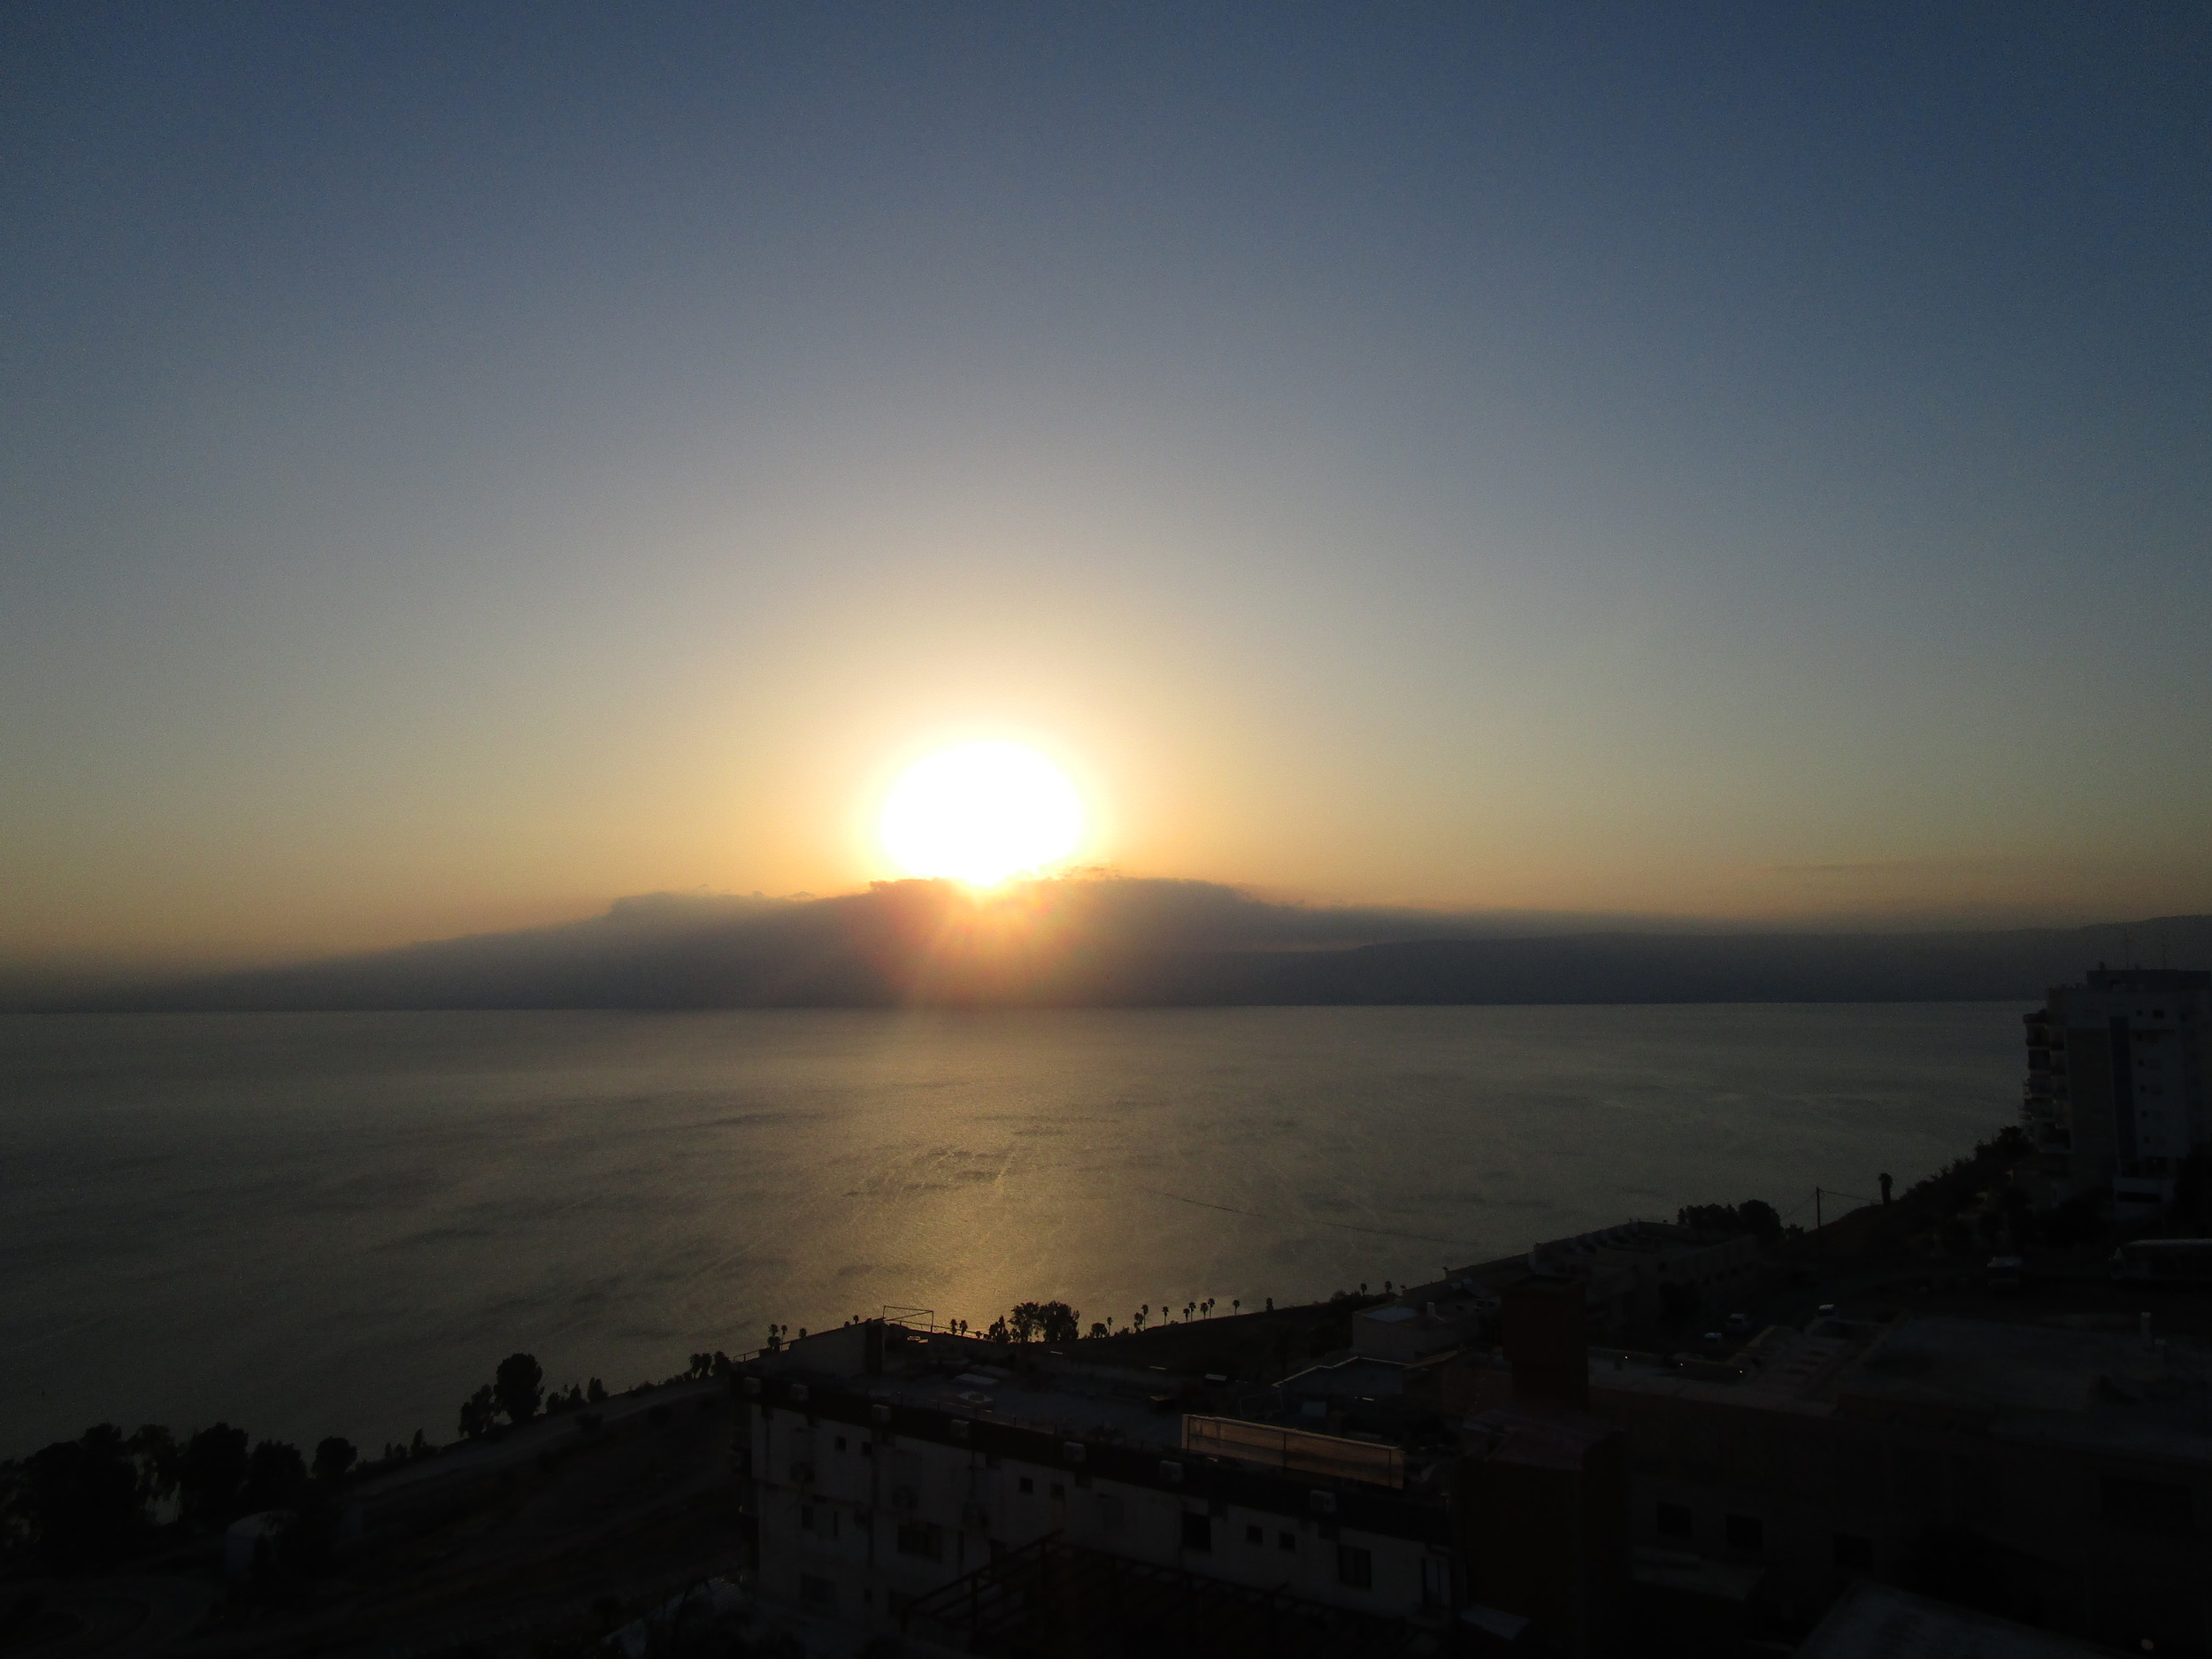  Our last sunrise. This was taken from our room along the shore of the Sea of Galilee. Life is downhill from here. 